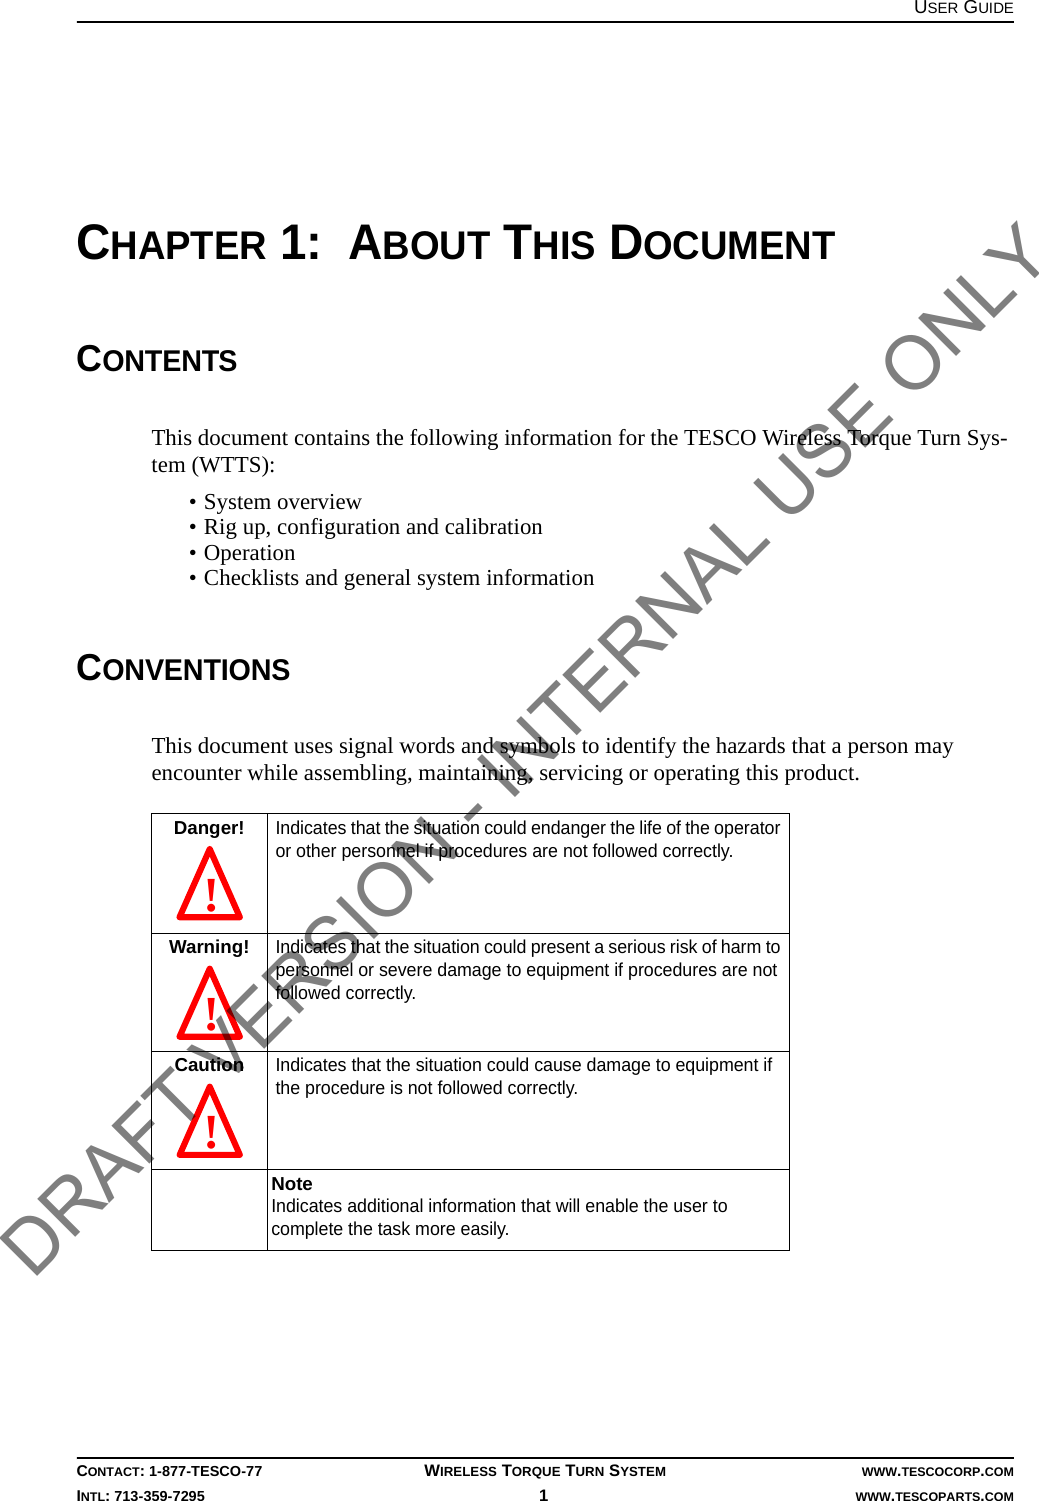 USER GUIDECONTACT: 1-877-TESCO-77 WIRELESS TORQUE TURN SYSTEM WWW.TESCOCORP.COMINTL: 713-359-7295 1   WWW.TESCOPARTS.COMCHAPTER 1:  ABOUT THIS DOCUMENTCONTENTSThis document contains the following information for the TESCO Wireless Torque Turn Sys-tem (WTTS):• System overview• Rig up, configuration and calibration• Operation• Checklists and general system informationCONVENTIONSThis document uses signal words and symbols to identify the hazards that a person may encounter while assembling, maintaining, servicing or operating this product.Danger!Indicates that the situation could endanger the life of the operator or other personnel if procedures are not followed correctly.Warning!Indicates that the situation could present a serious risk of harm to personnel or severe damage to equipment if procedures are not followed correctly.CautionIndicates that the situation could cause damage to equipment if the procedure is not followed correctly.NoteIndicates additional information that will enable the user to complete the task more easily. !  !  ! DRAFT VERSION - INTERNAL USE ONLY